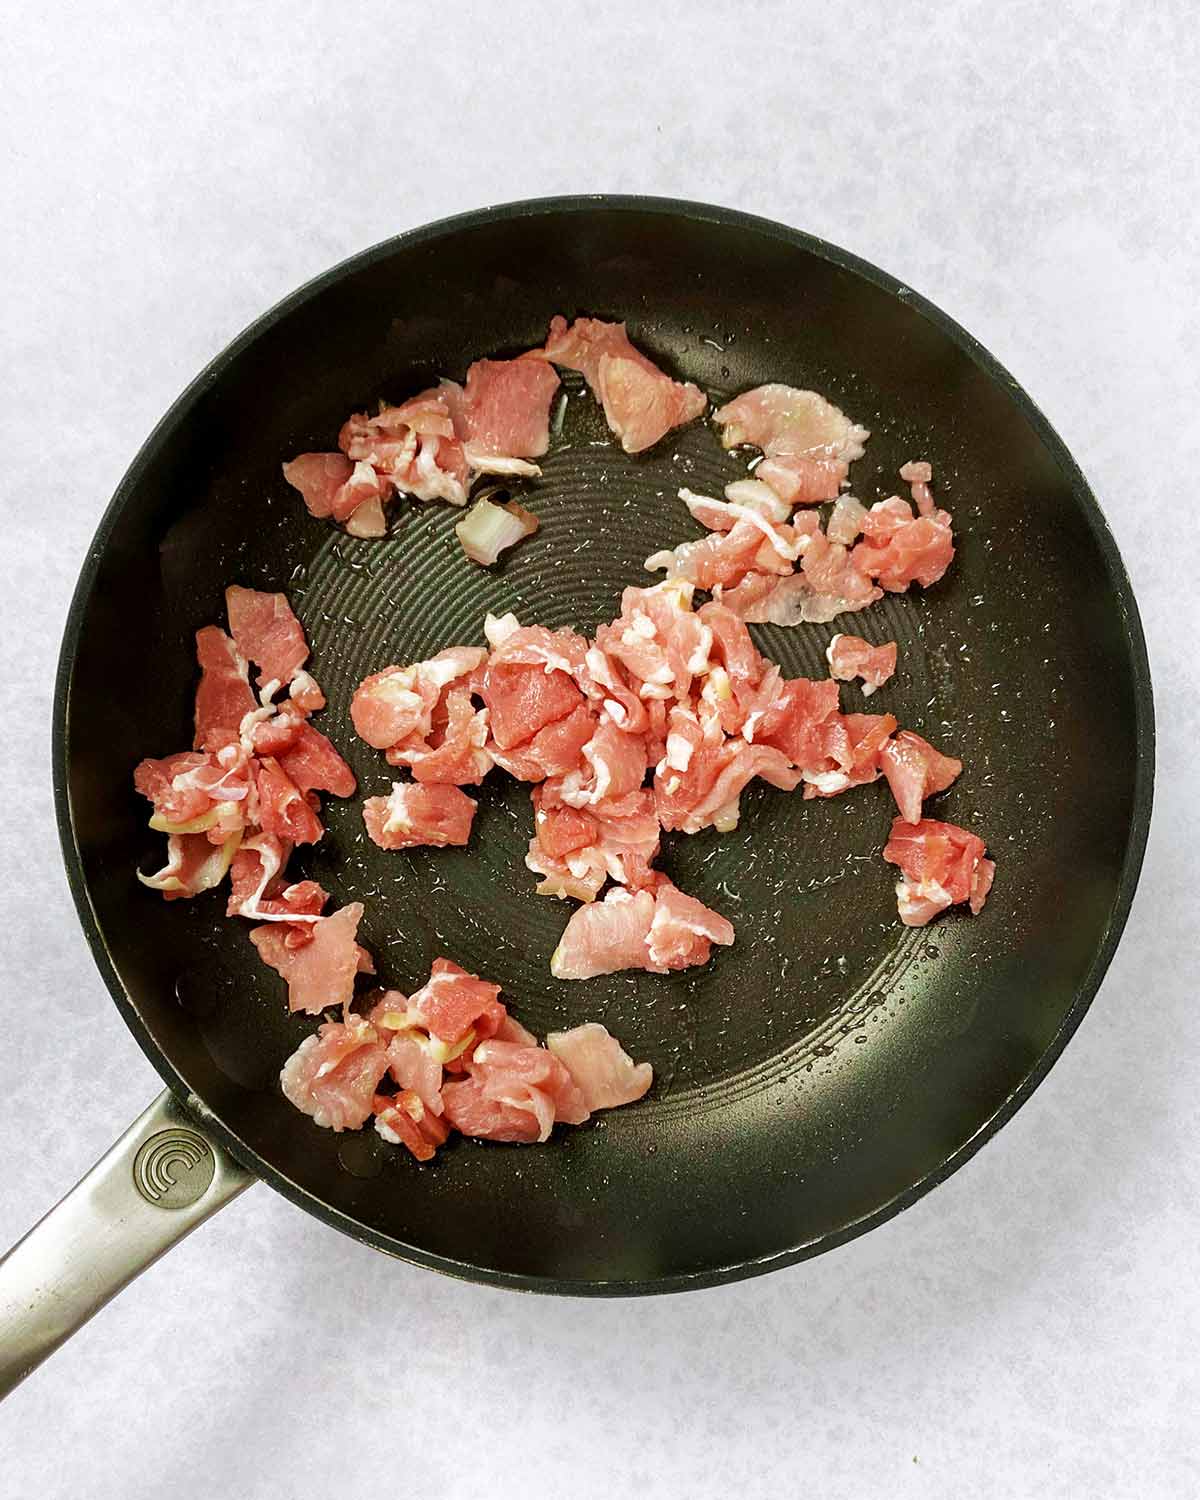 Chopped bacon cooking in a pan.